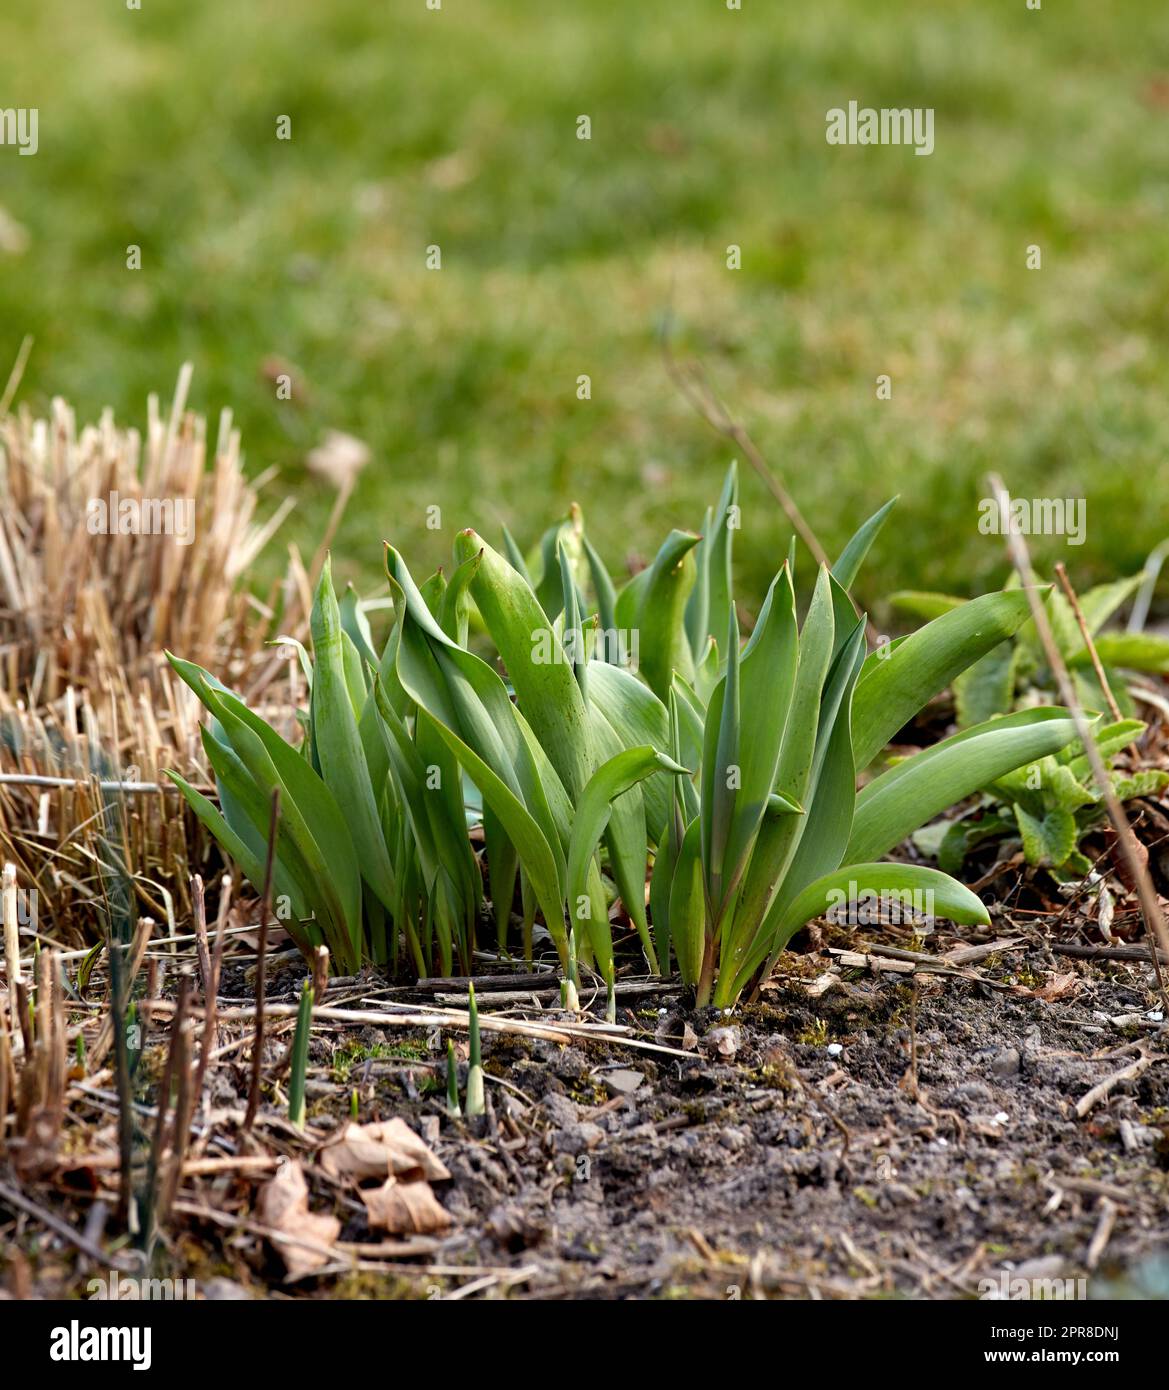 Closeup of green plant sprouts planted in soil in a garden. Details of the growth development process of a tulip flower growing in spring. Gardening for beginners with plants waiting to bloom Stock Photo